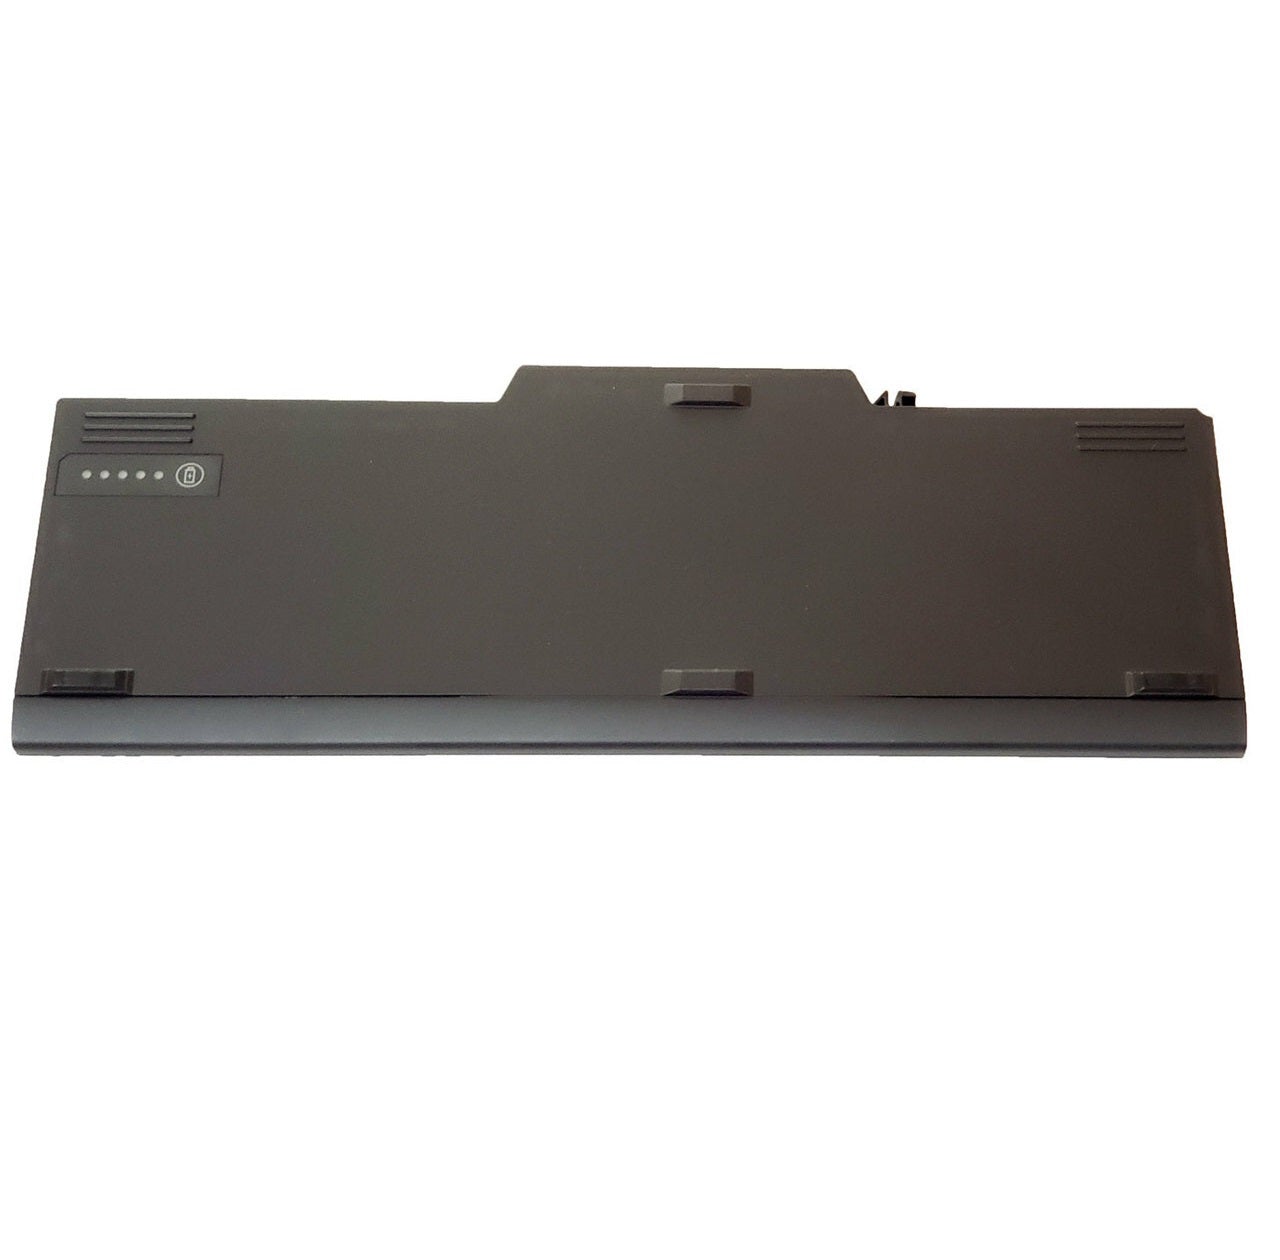 Replacement Dell Latitude XT2 XFR Tablet PC, PU536, 312-0650, J927H Replacement Laptop Battery